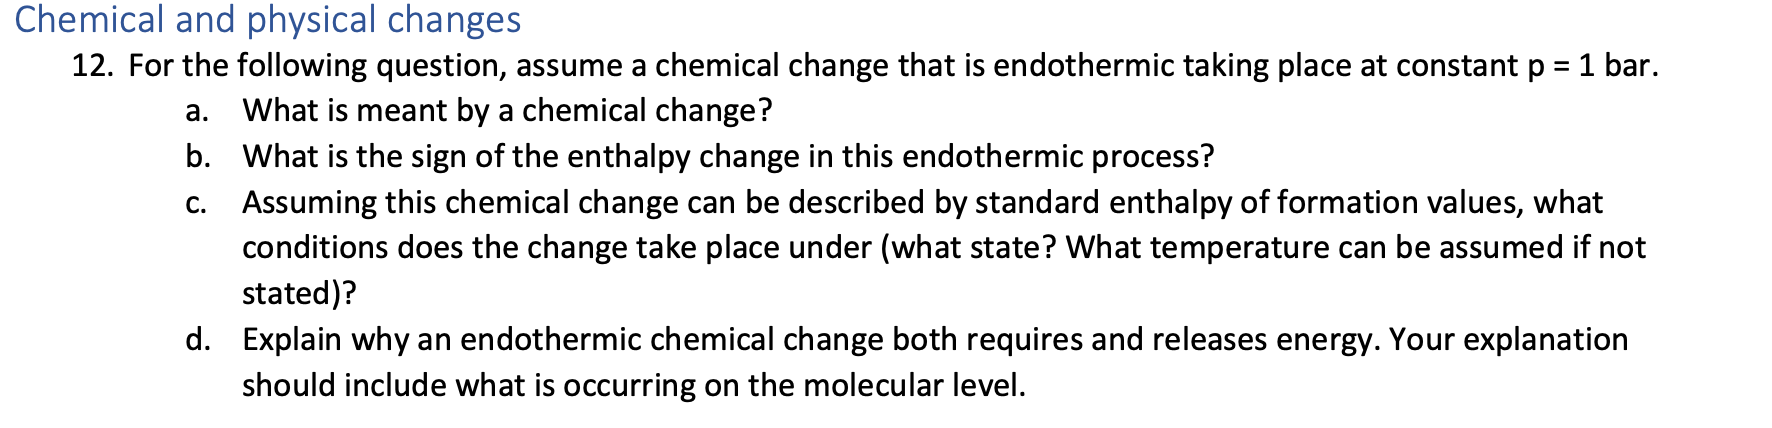 Chemical and physical changes
12. For the following question, assume a chemical change that is endothermic taking place at constant p =1 bar.
%3D
a. What is meant by a chemical change?
b. What is the sign of the enthalpy change in this endothermic process?
c. Assuming this chemical change can be described by standard enthalpy of formation values, what
conditions does the change take place under (what state? What temperature can be assumed if not
stated)?
d. Explain why an endothermic chemical change both requires and releases energy. Your explanation
should include what is occurring on the molecular level.
